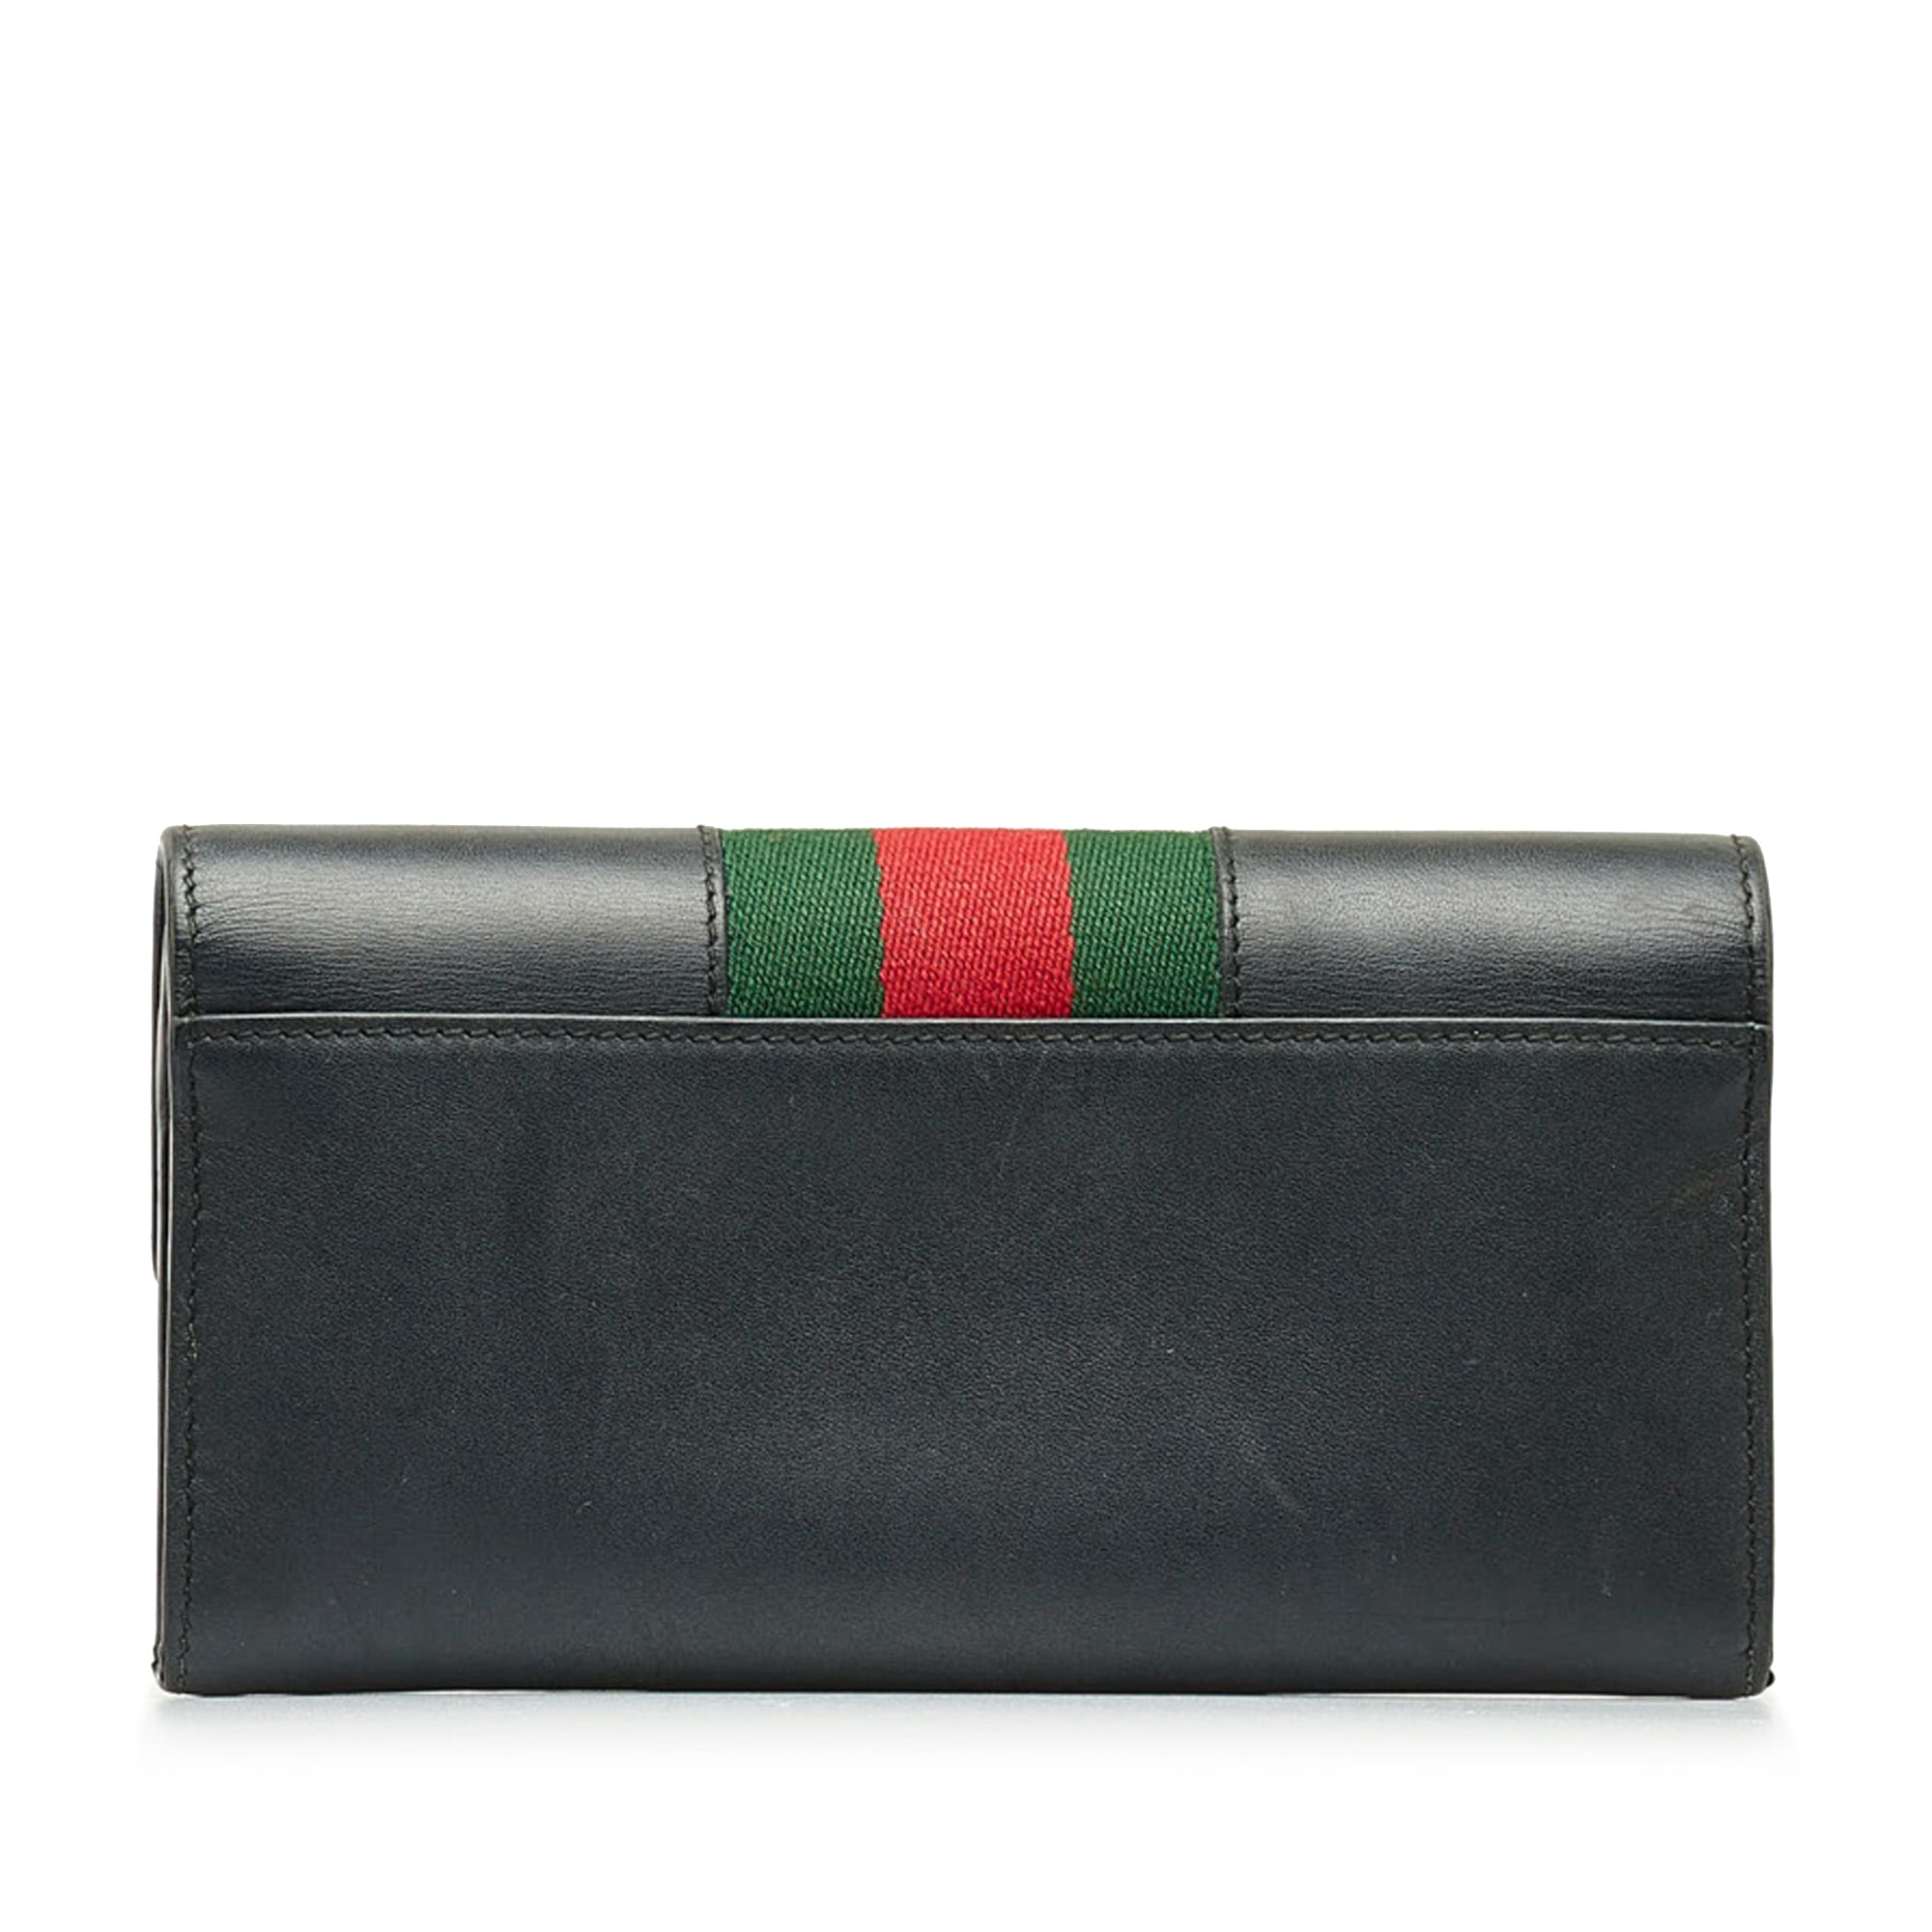 Gucci Navy Blue Guccissima Leather Long Wallet Gucci